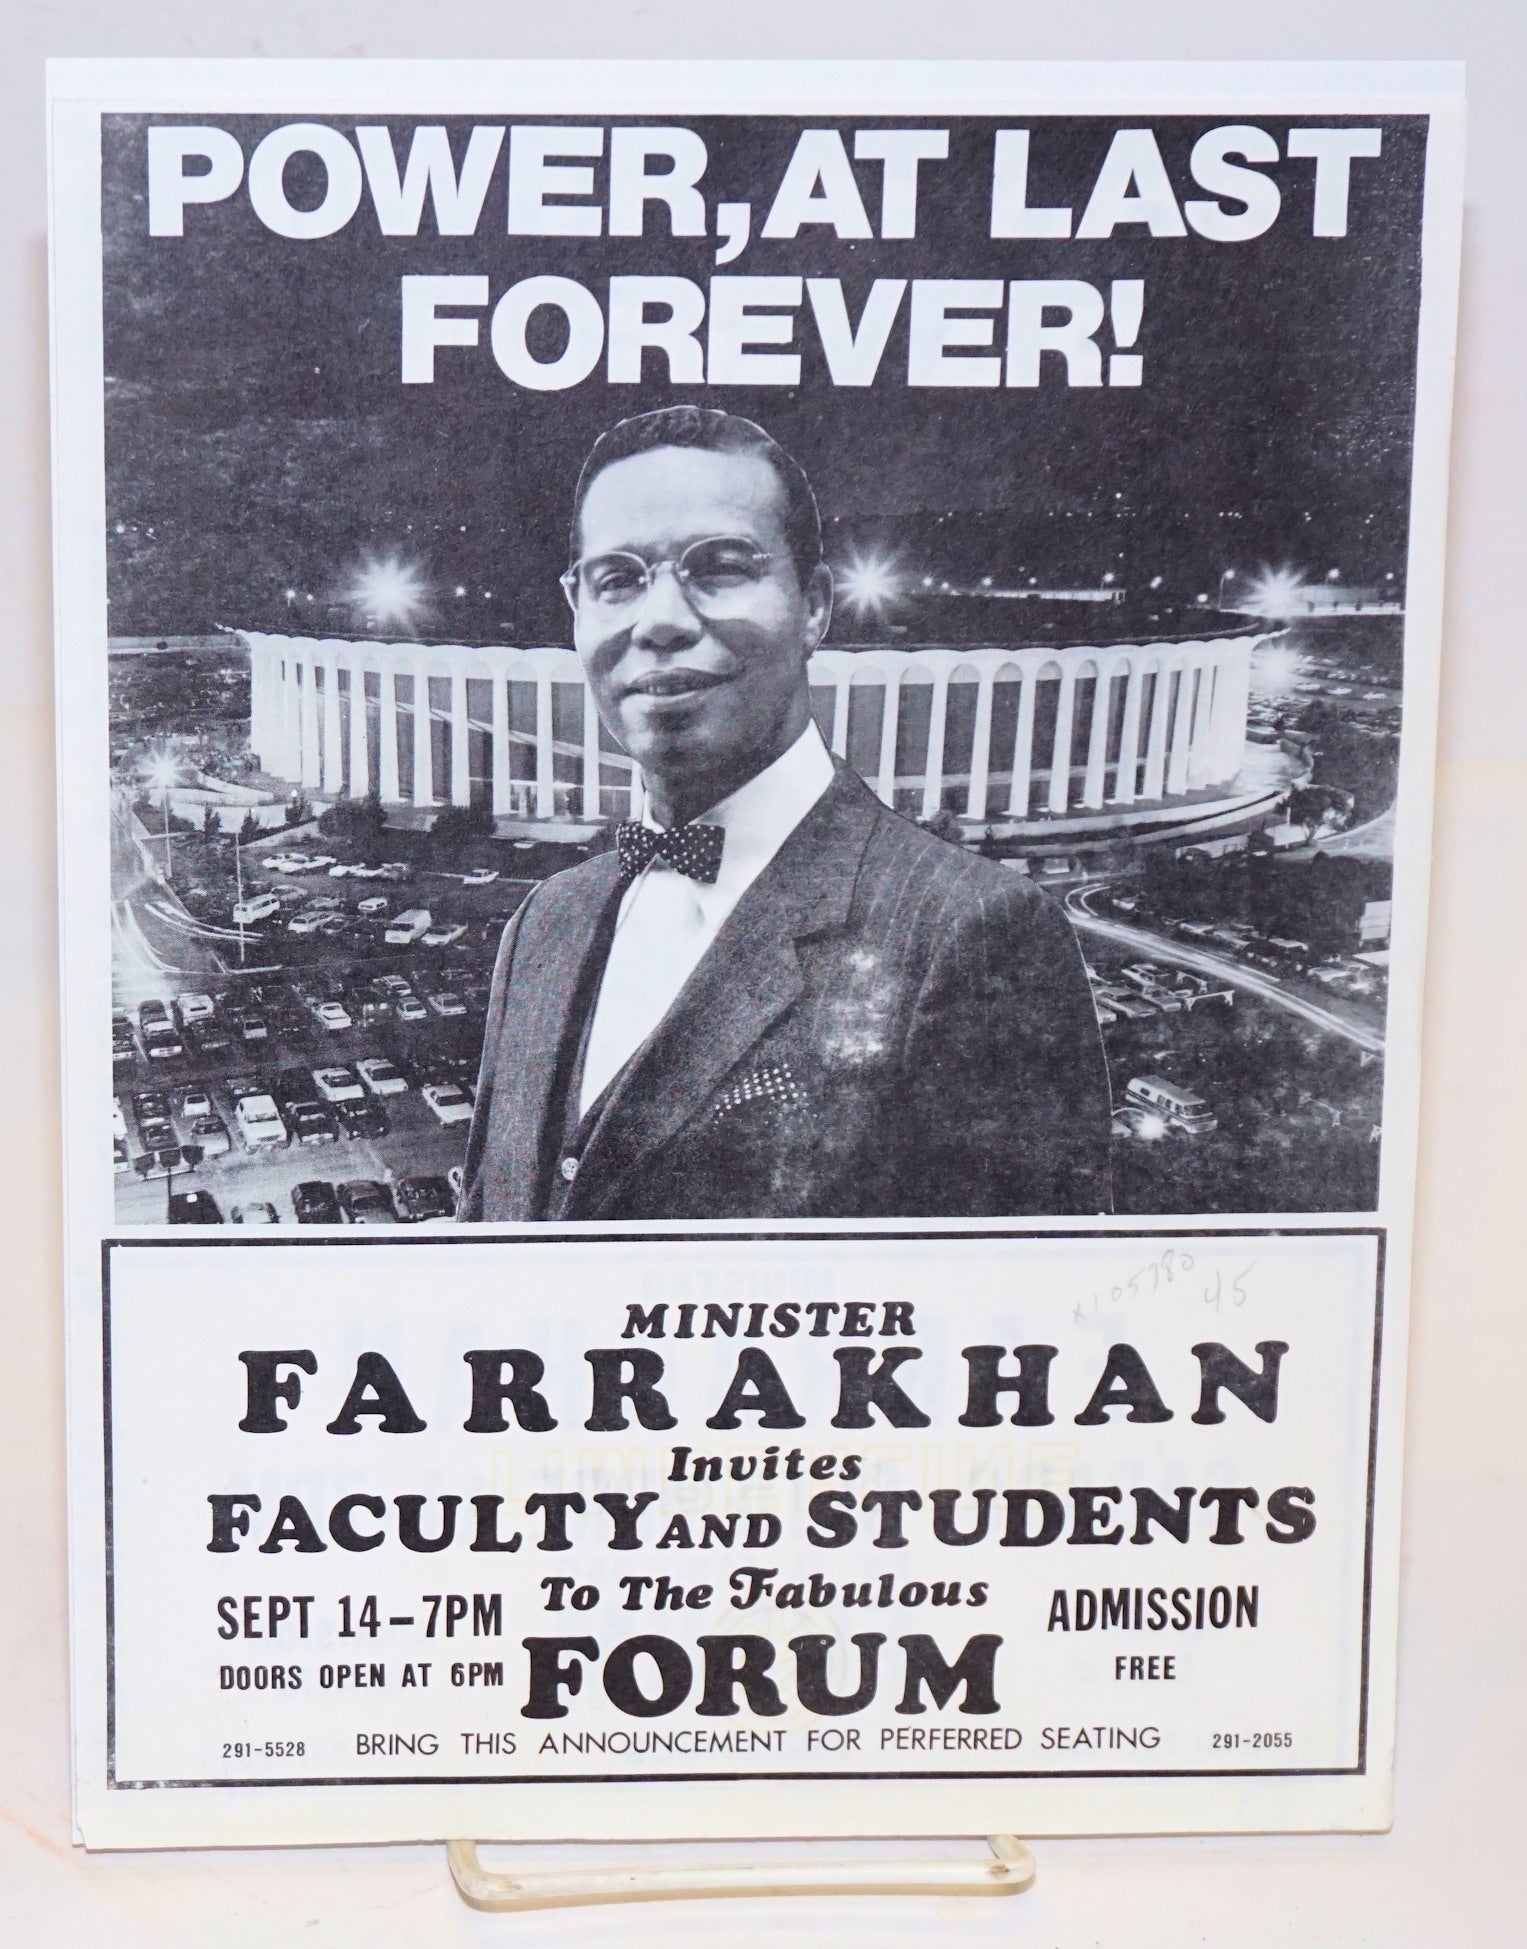 Power, at last forever!/Poder al fin para siempre; Minister Farrakhan invites faculty and students to the fabulous Forum, Sept 14- 7 pm, admission free photo